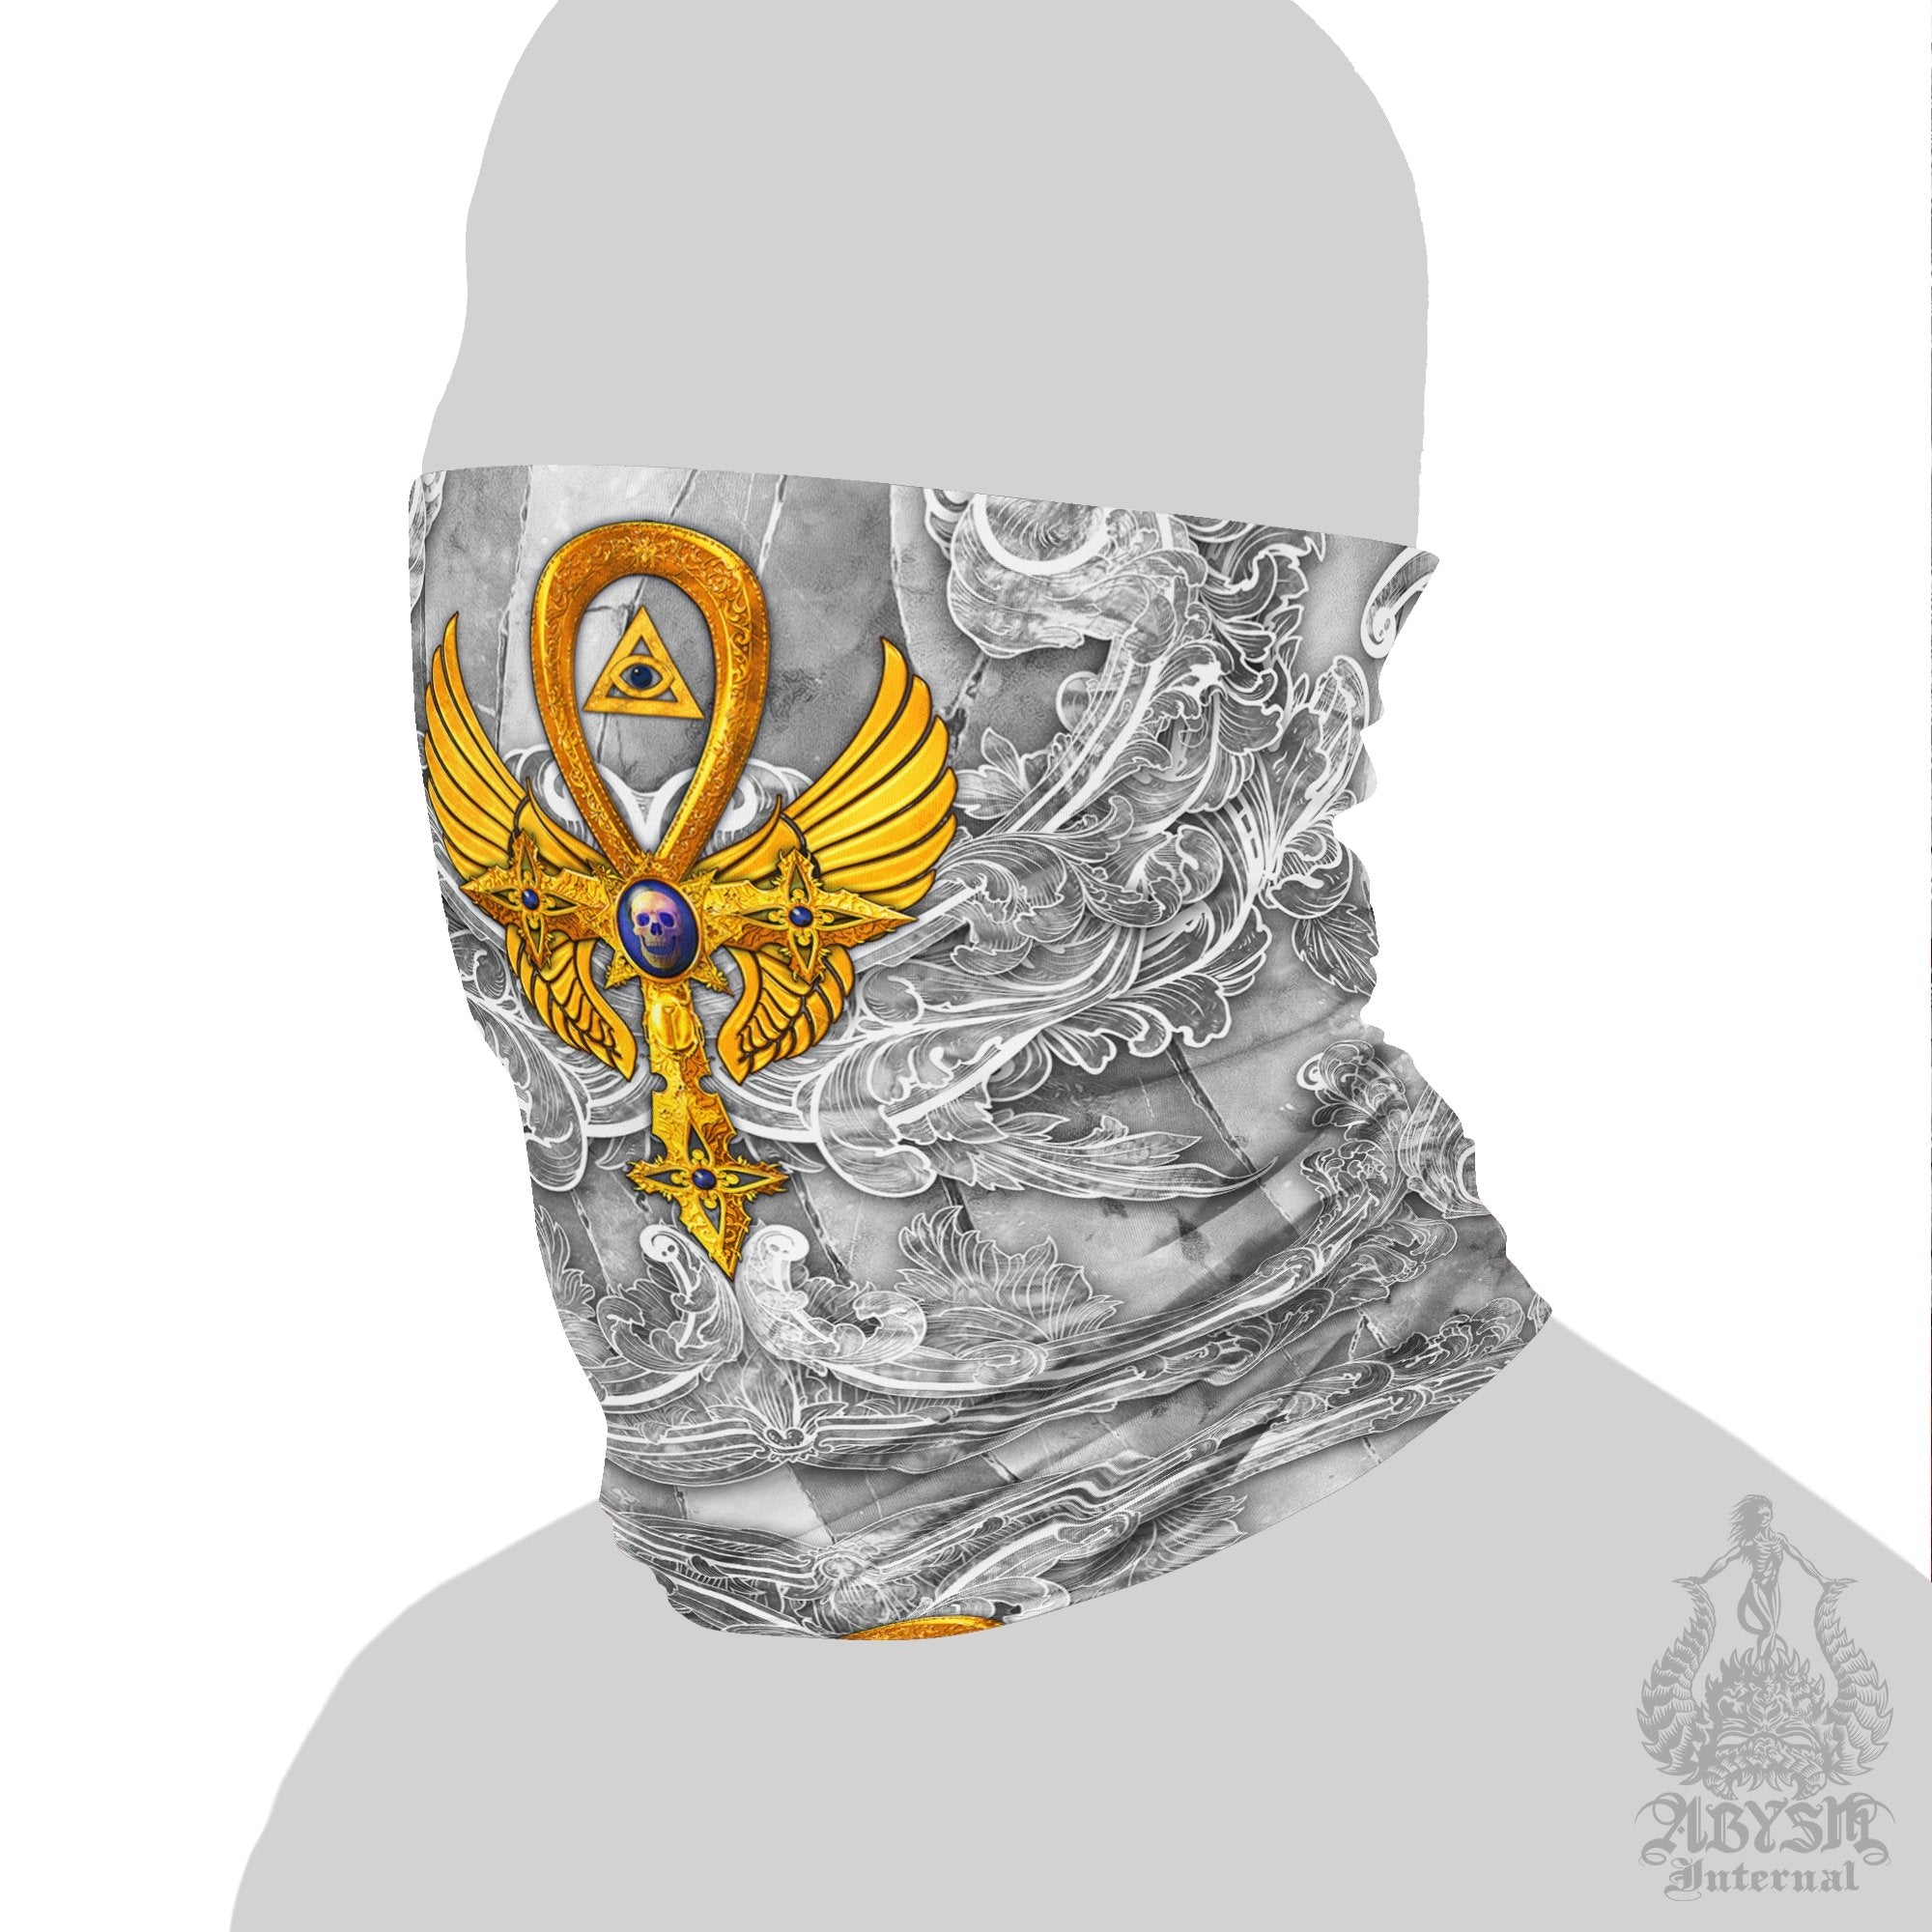 White Goth Neck Gaiter, Face Mask, Head Covering - Stone Gold Ankh - Abysm Internal